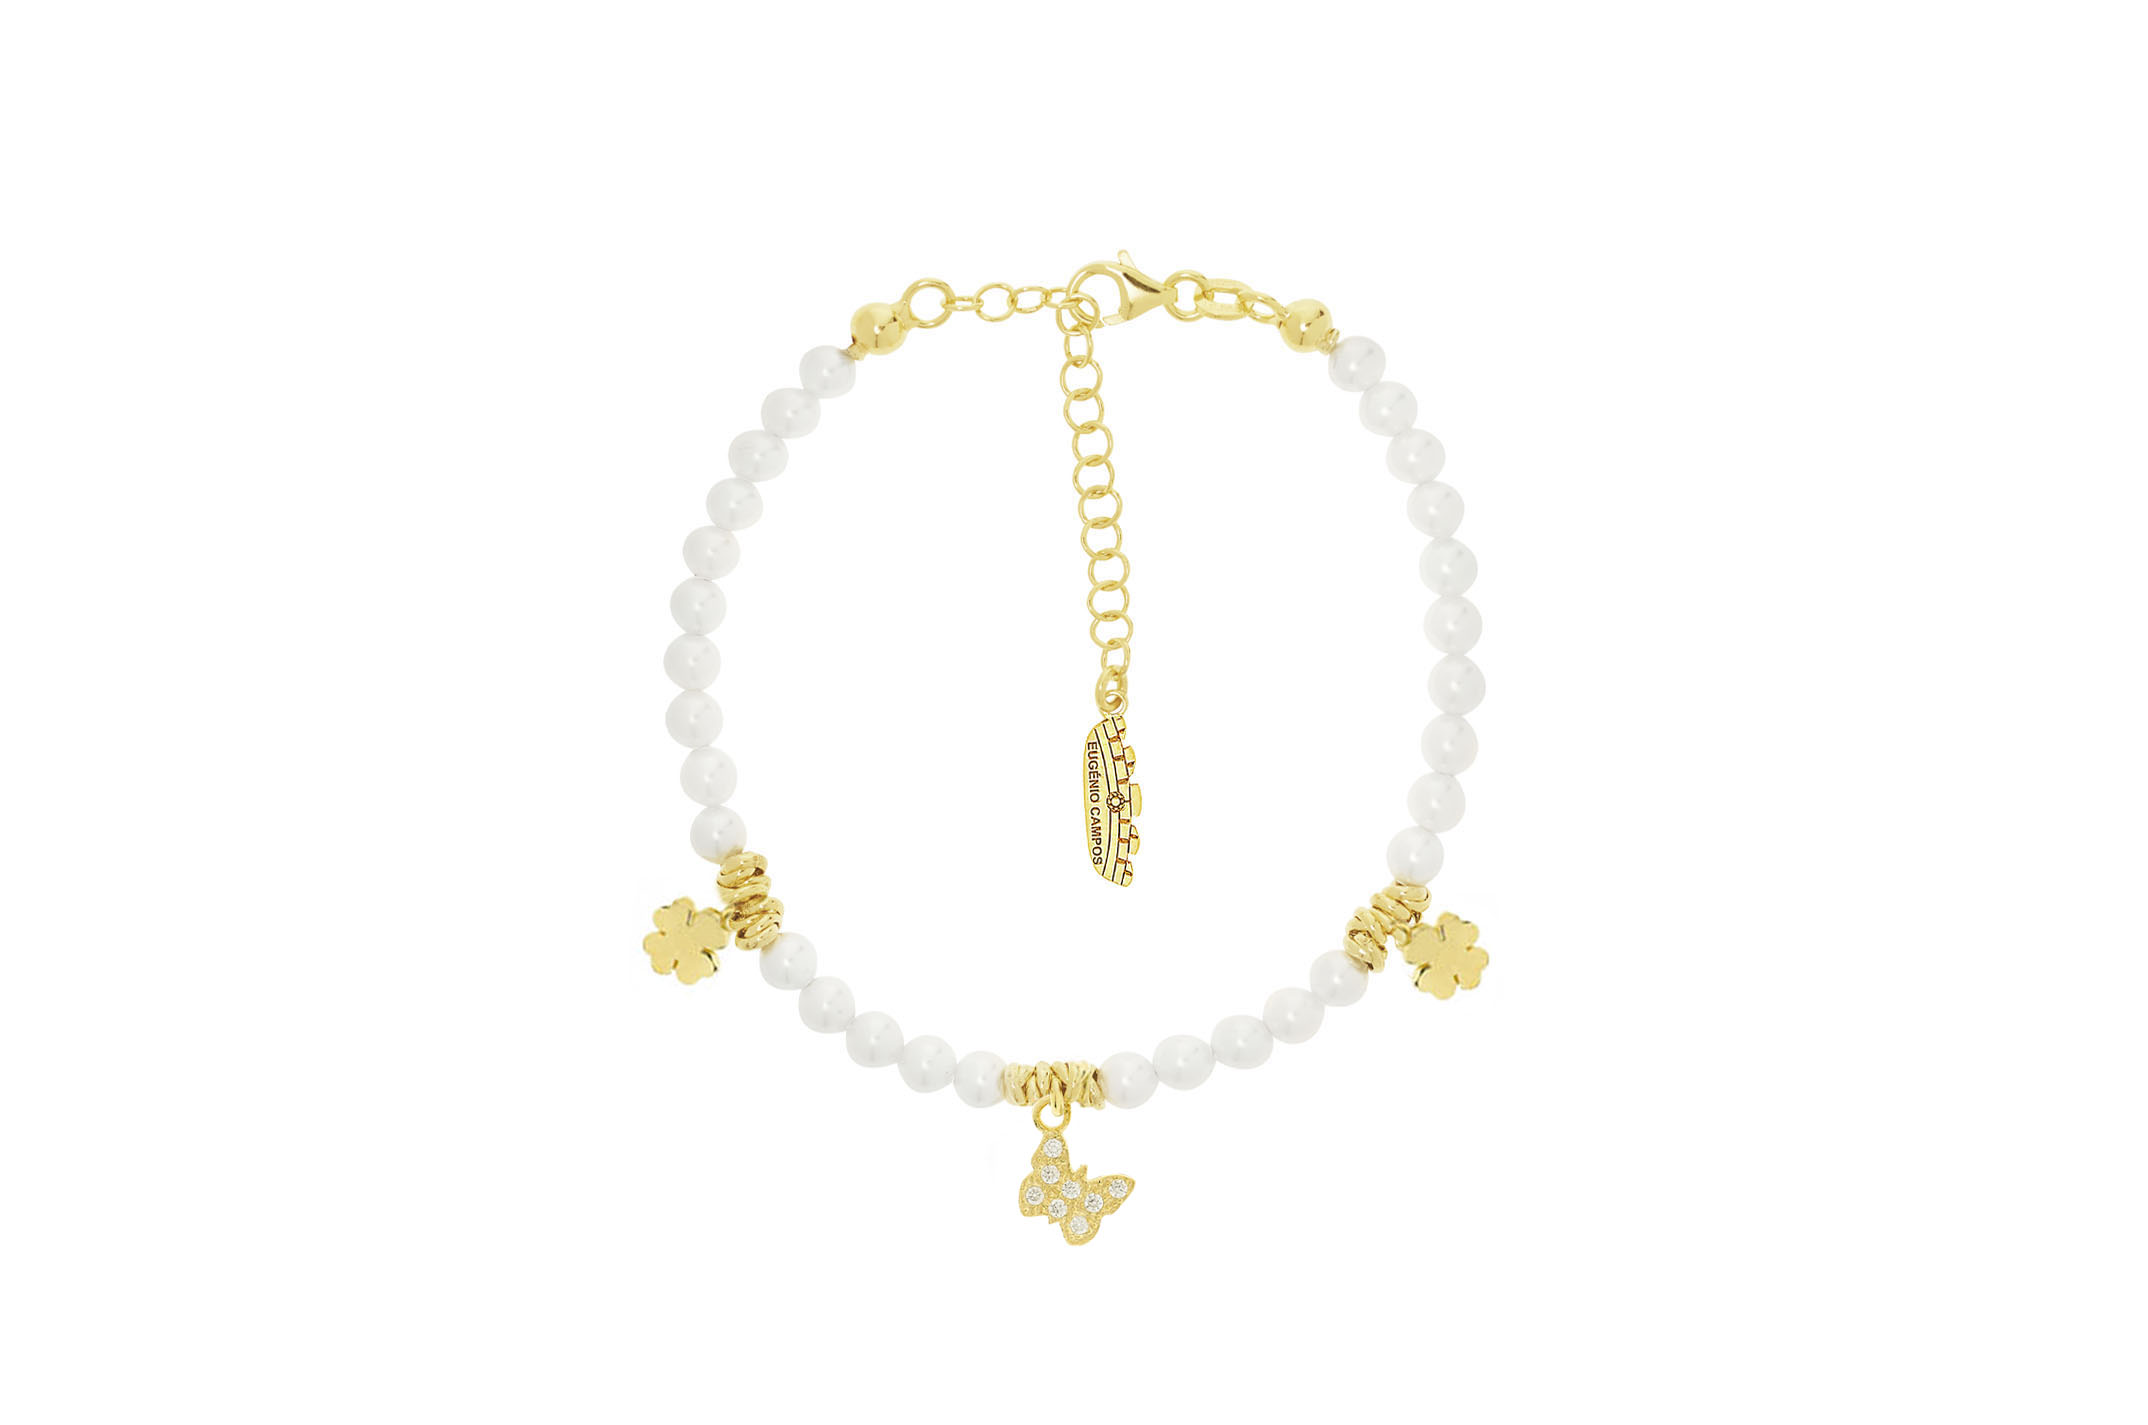 Jewel: bracelet;Material: silver 925;Weight: 11.1 gr;Stone: pearl & zirconia;Color: yellow;Size: 16 cm + 5 cm;Pendent size: 0.5 cm